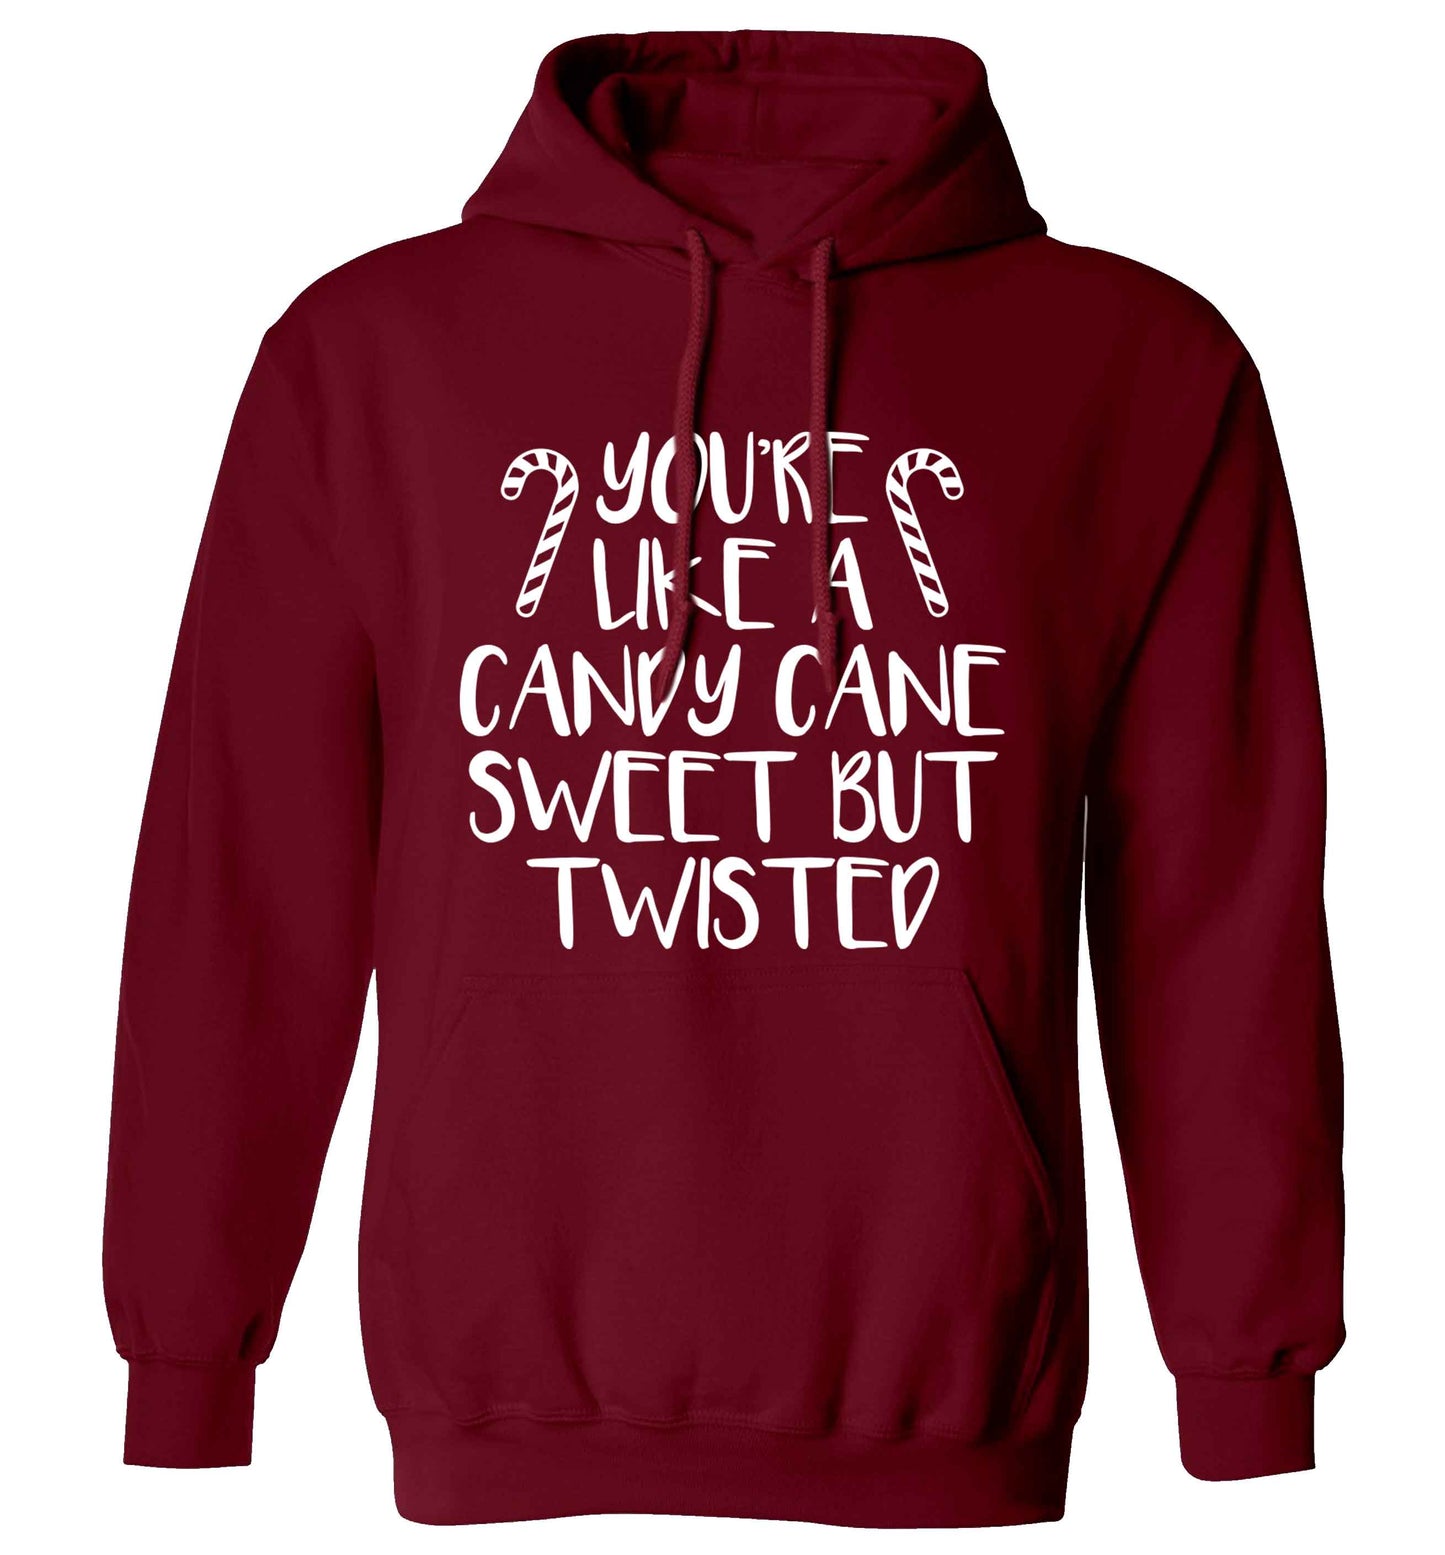 You're like a candy cane sweet but twisted adults unisex maroon hoodie 2XL